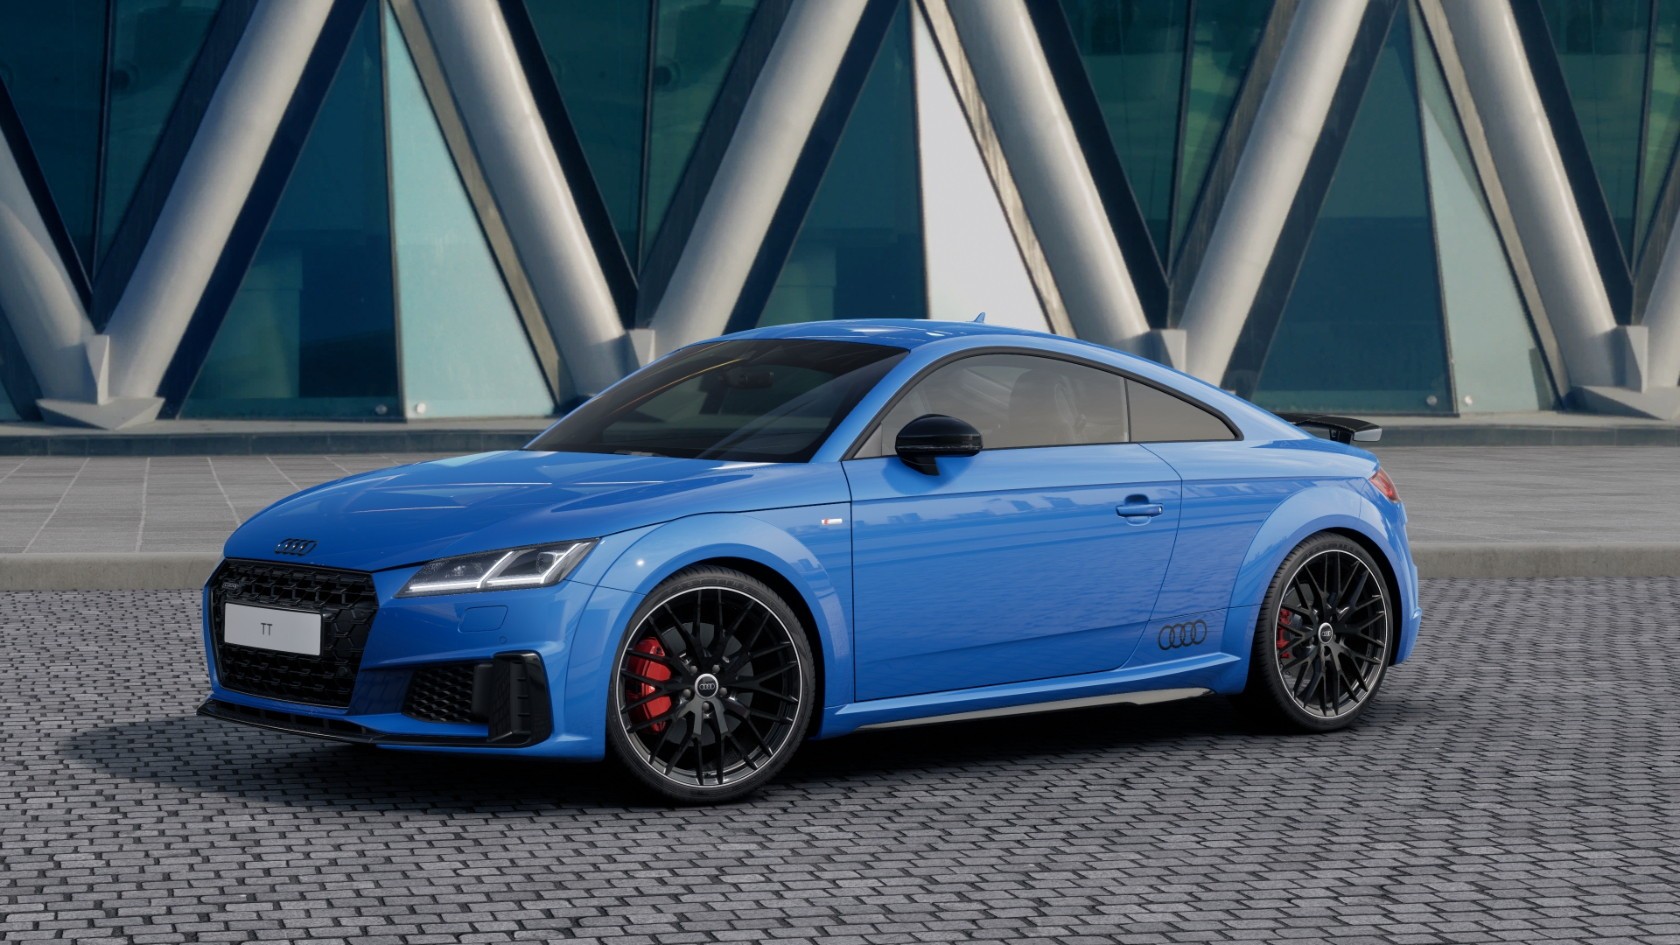 The new Audi TT – an update for the design icon